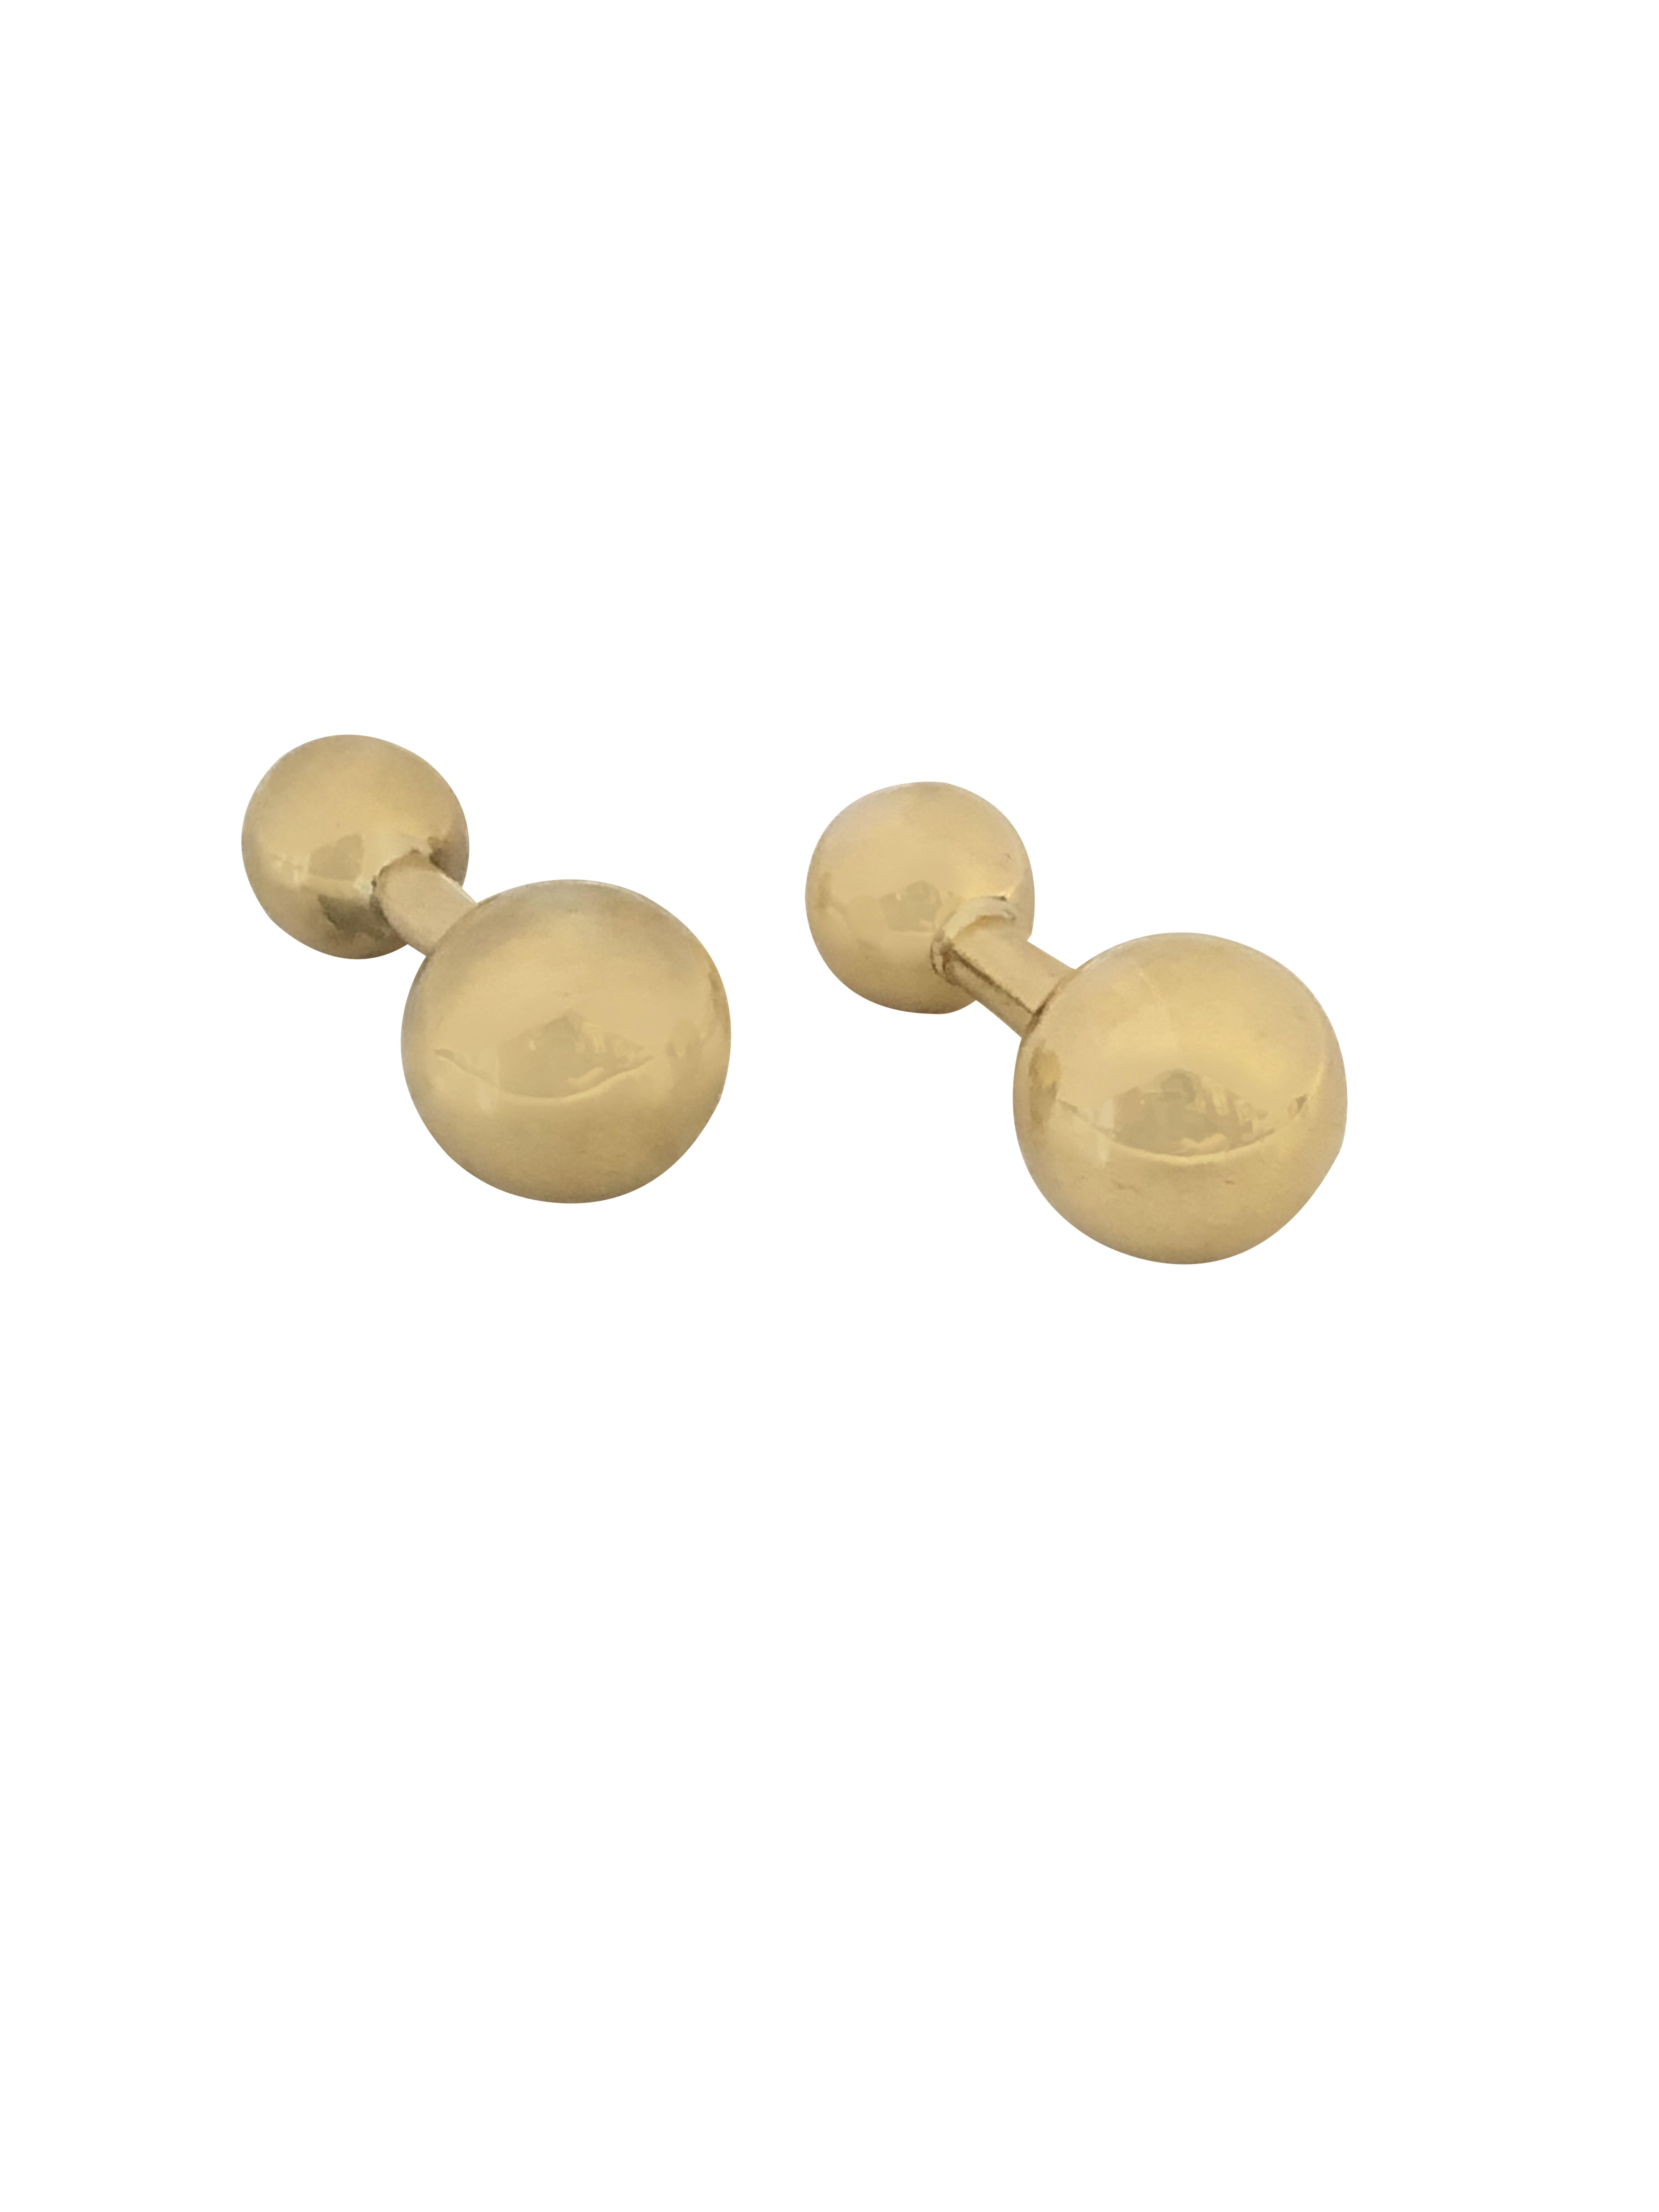 Circa 1940 Cartier 18K Yellow Gold Barbell form Cufflinks,  The larger end measures 12 M.M. ( 1/2 inch ) in diameter with a weight of 11 grams for the Pair. Hallow Construction and both are signed CARTIER and are numbered. Original Cartier